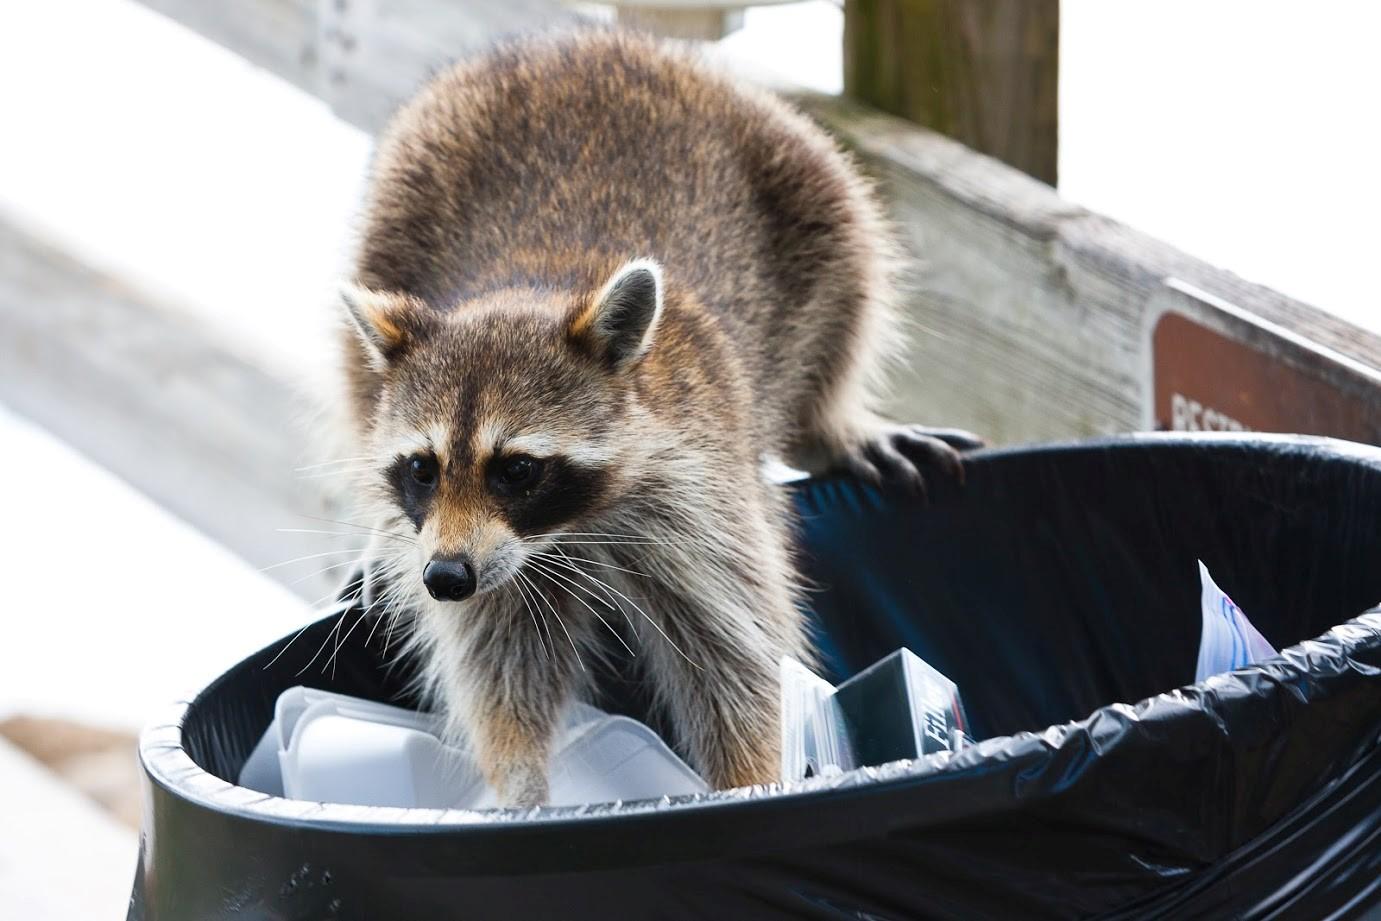 Animals That Love Dumpsters | Tri-State Disposal